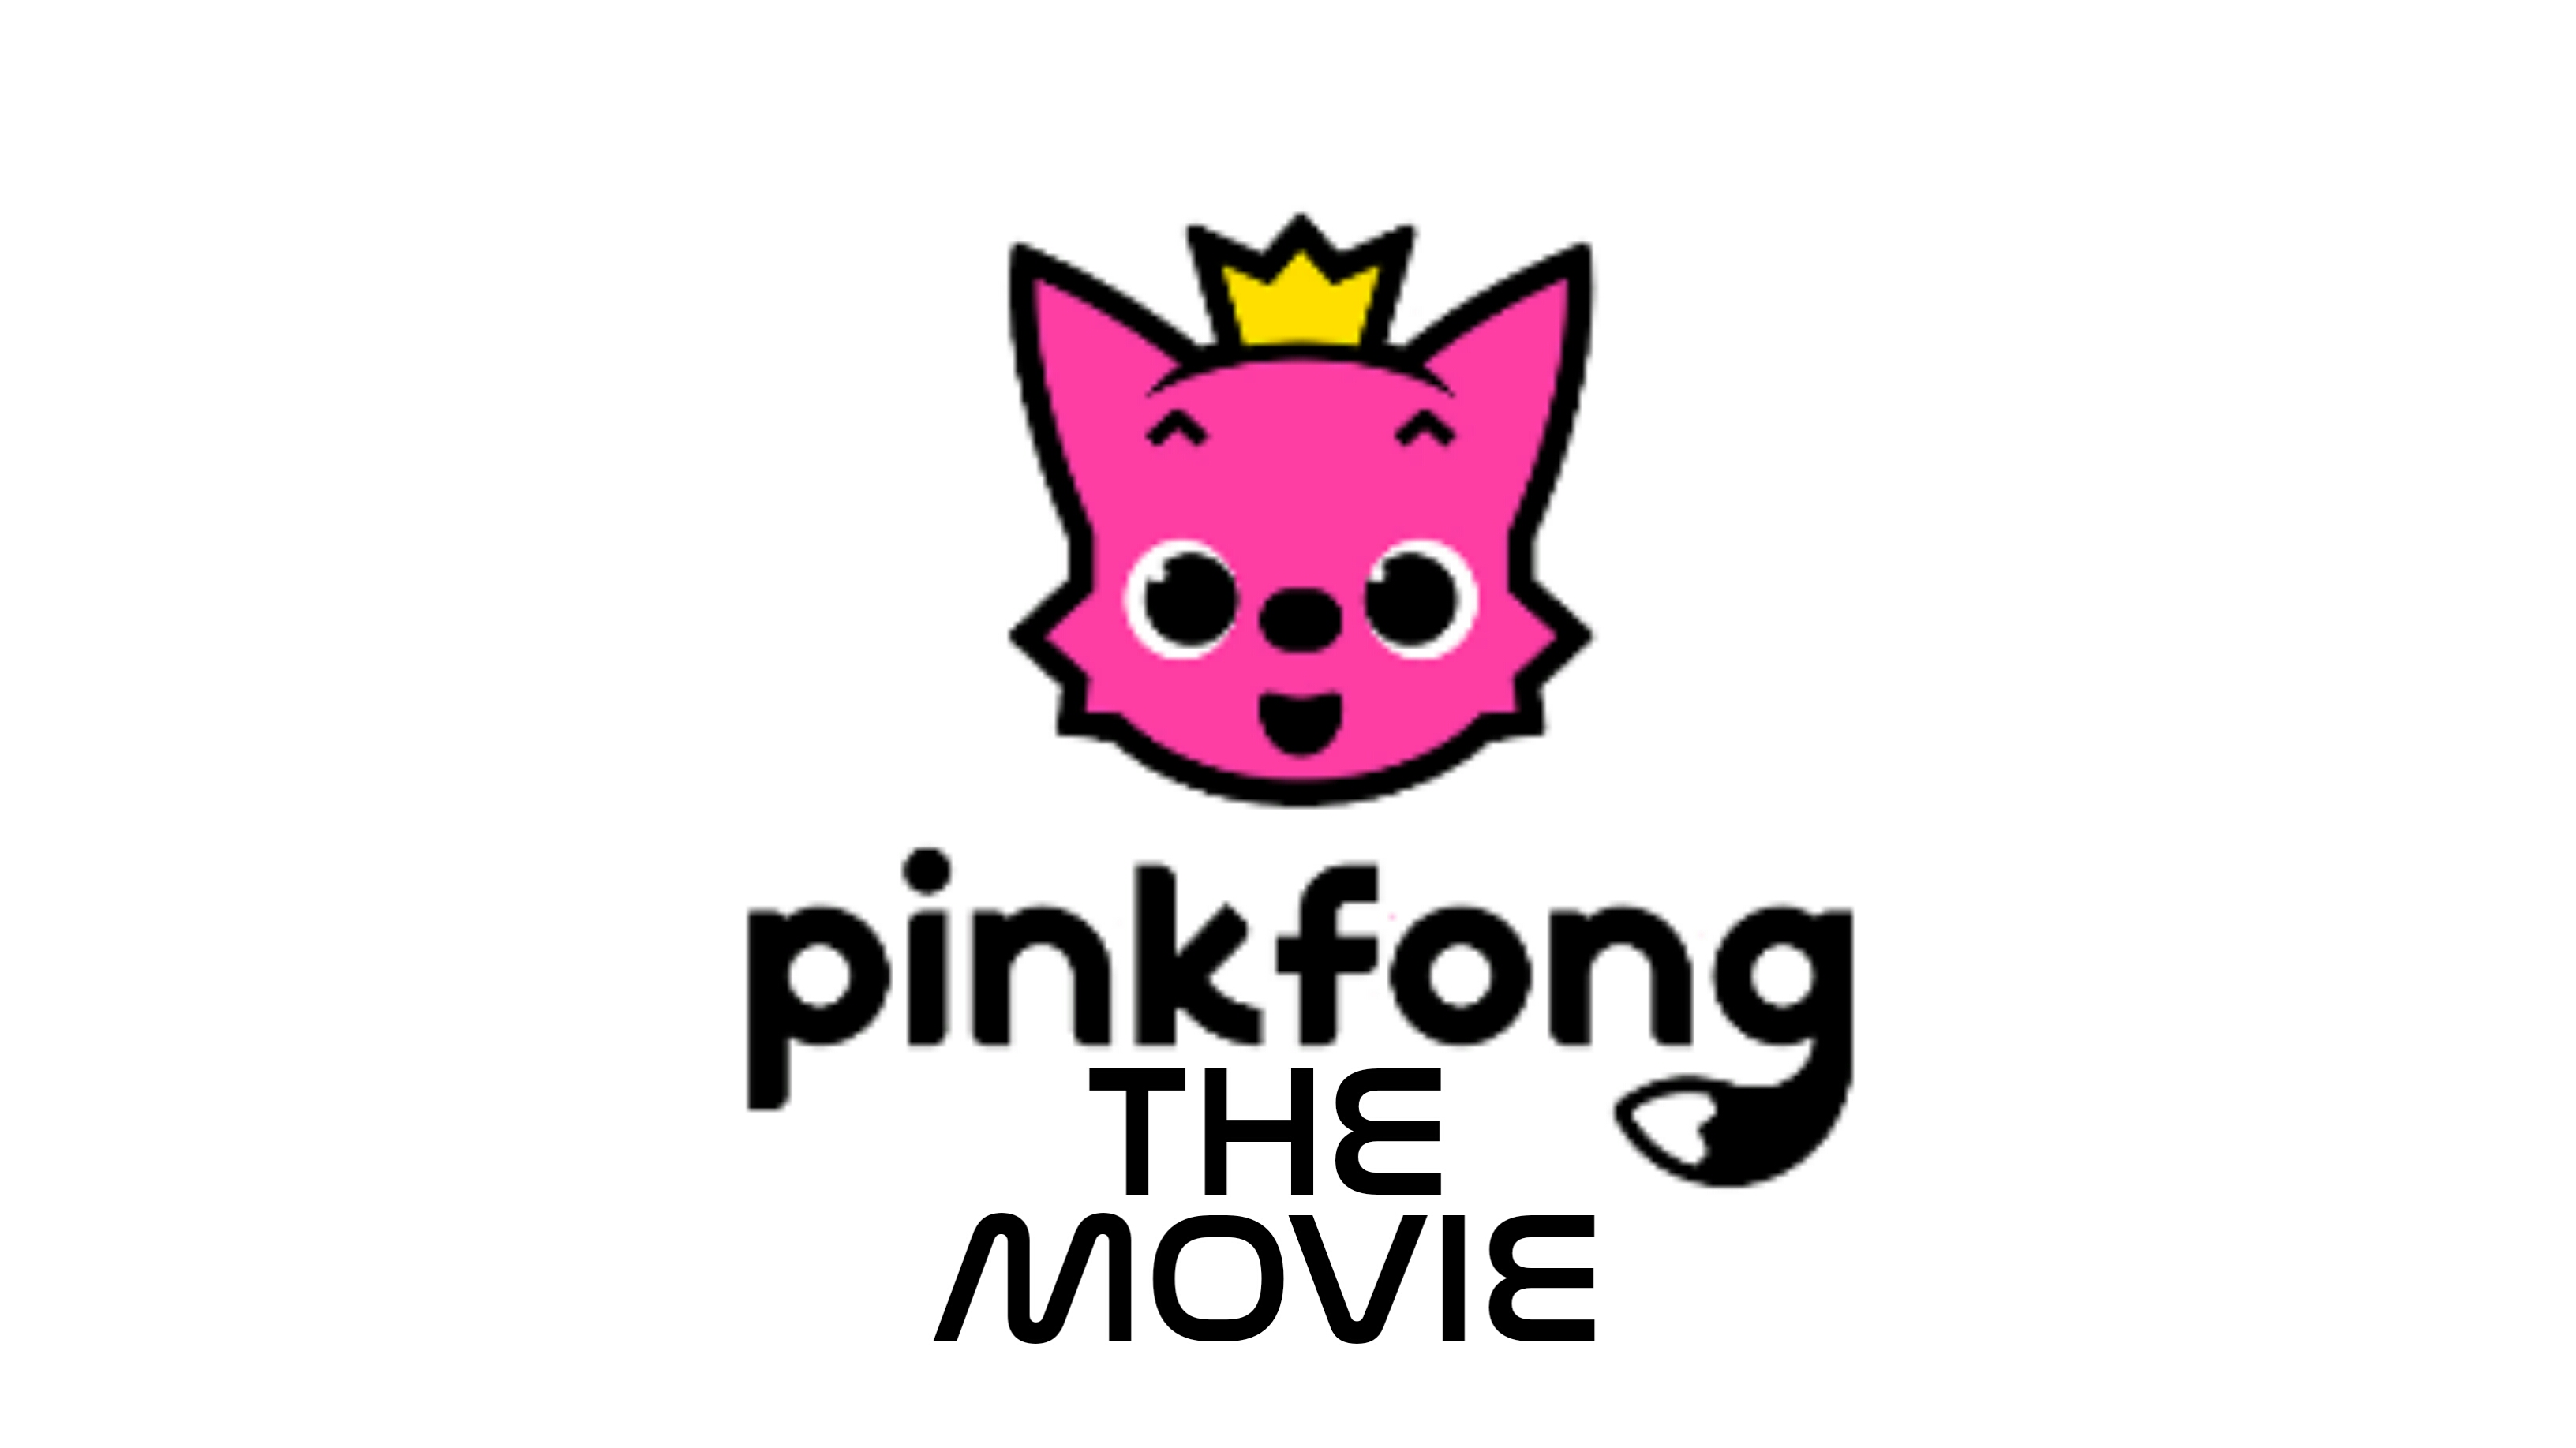 Pinkfong The Movie Logo (My Version) by Nightingale1000 on DeviantArt